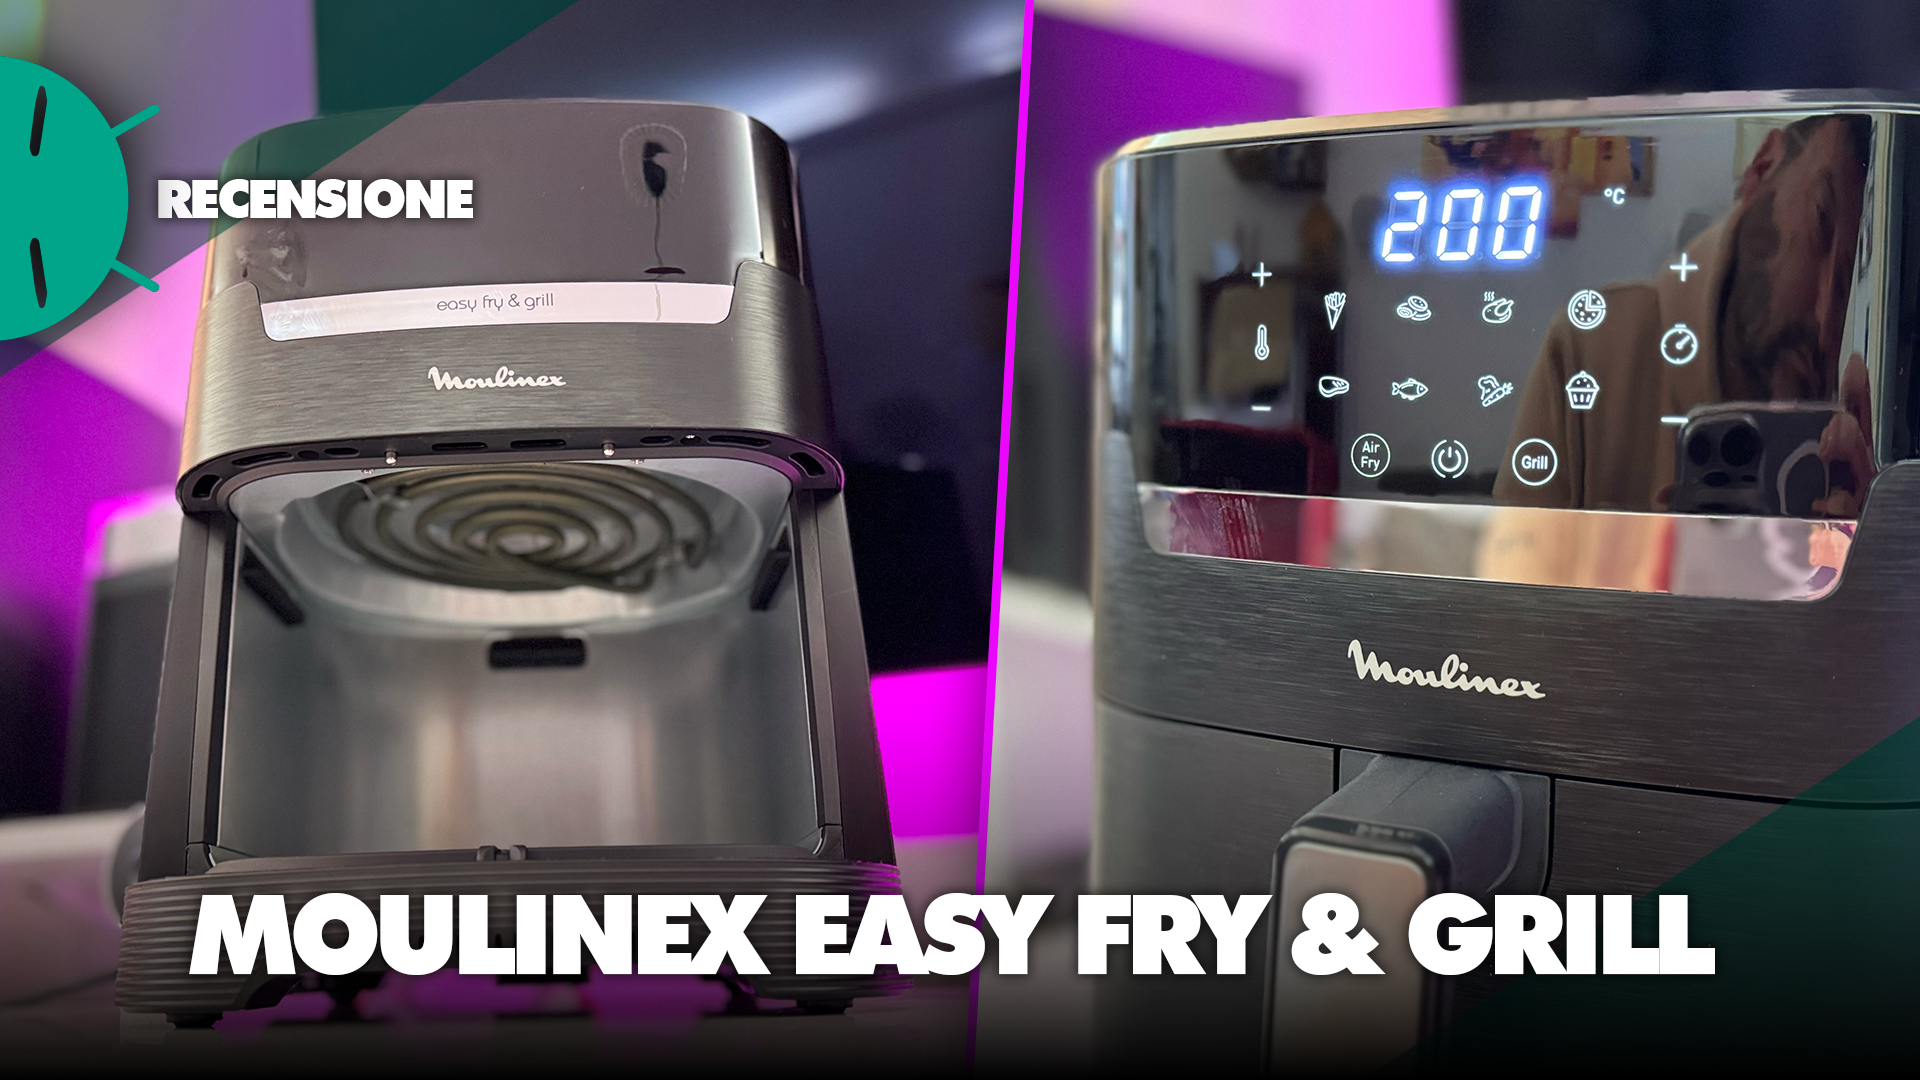 Recensione Moulinex Easy Fry and Grill: friggitrice ad aria 2-in-1 